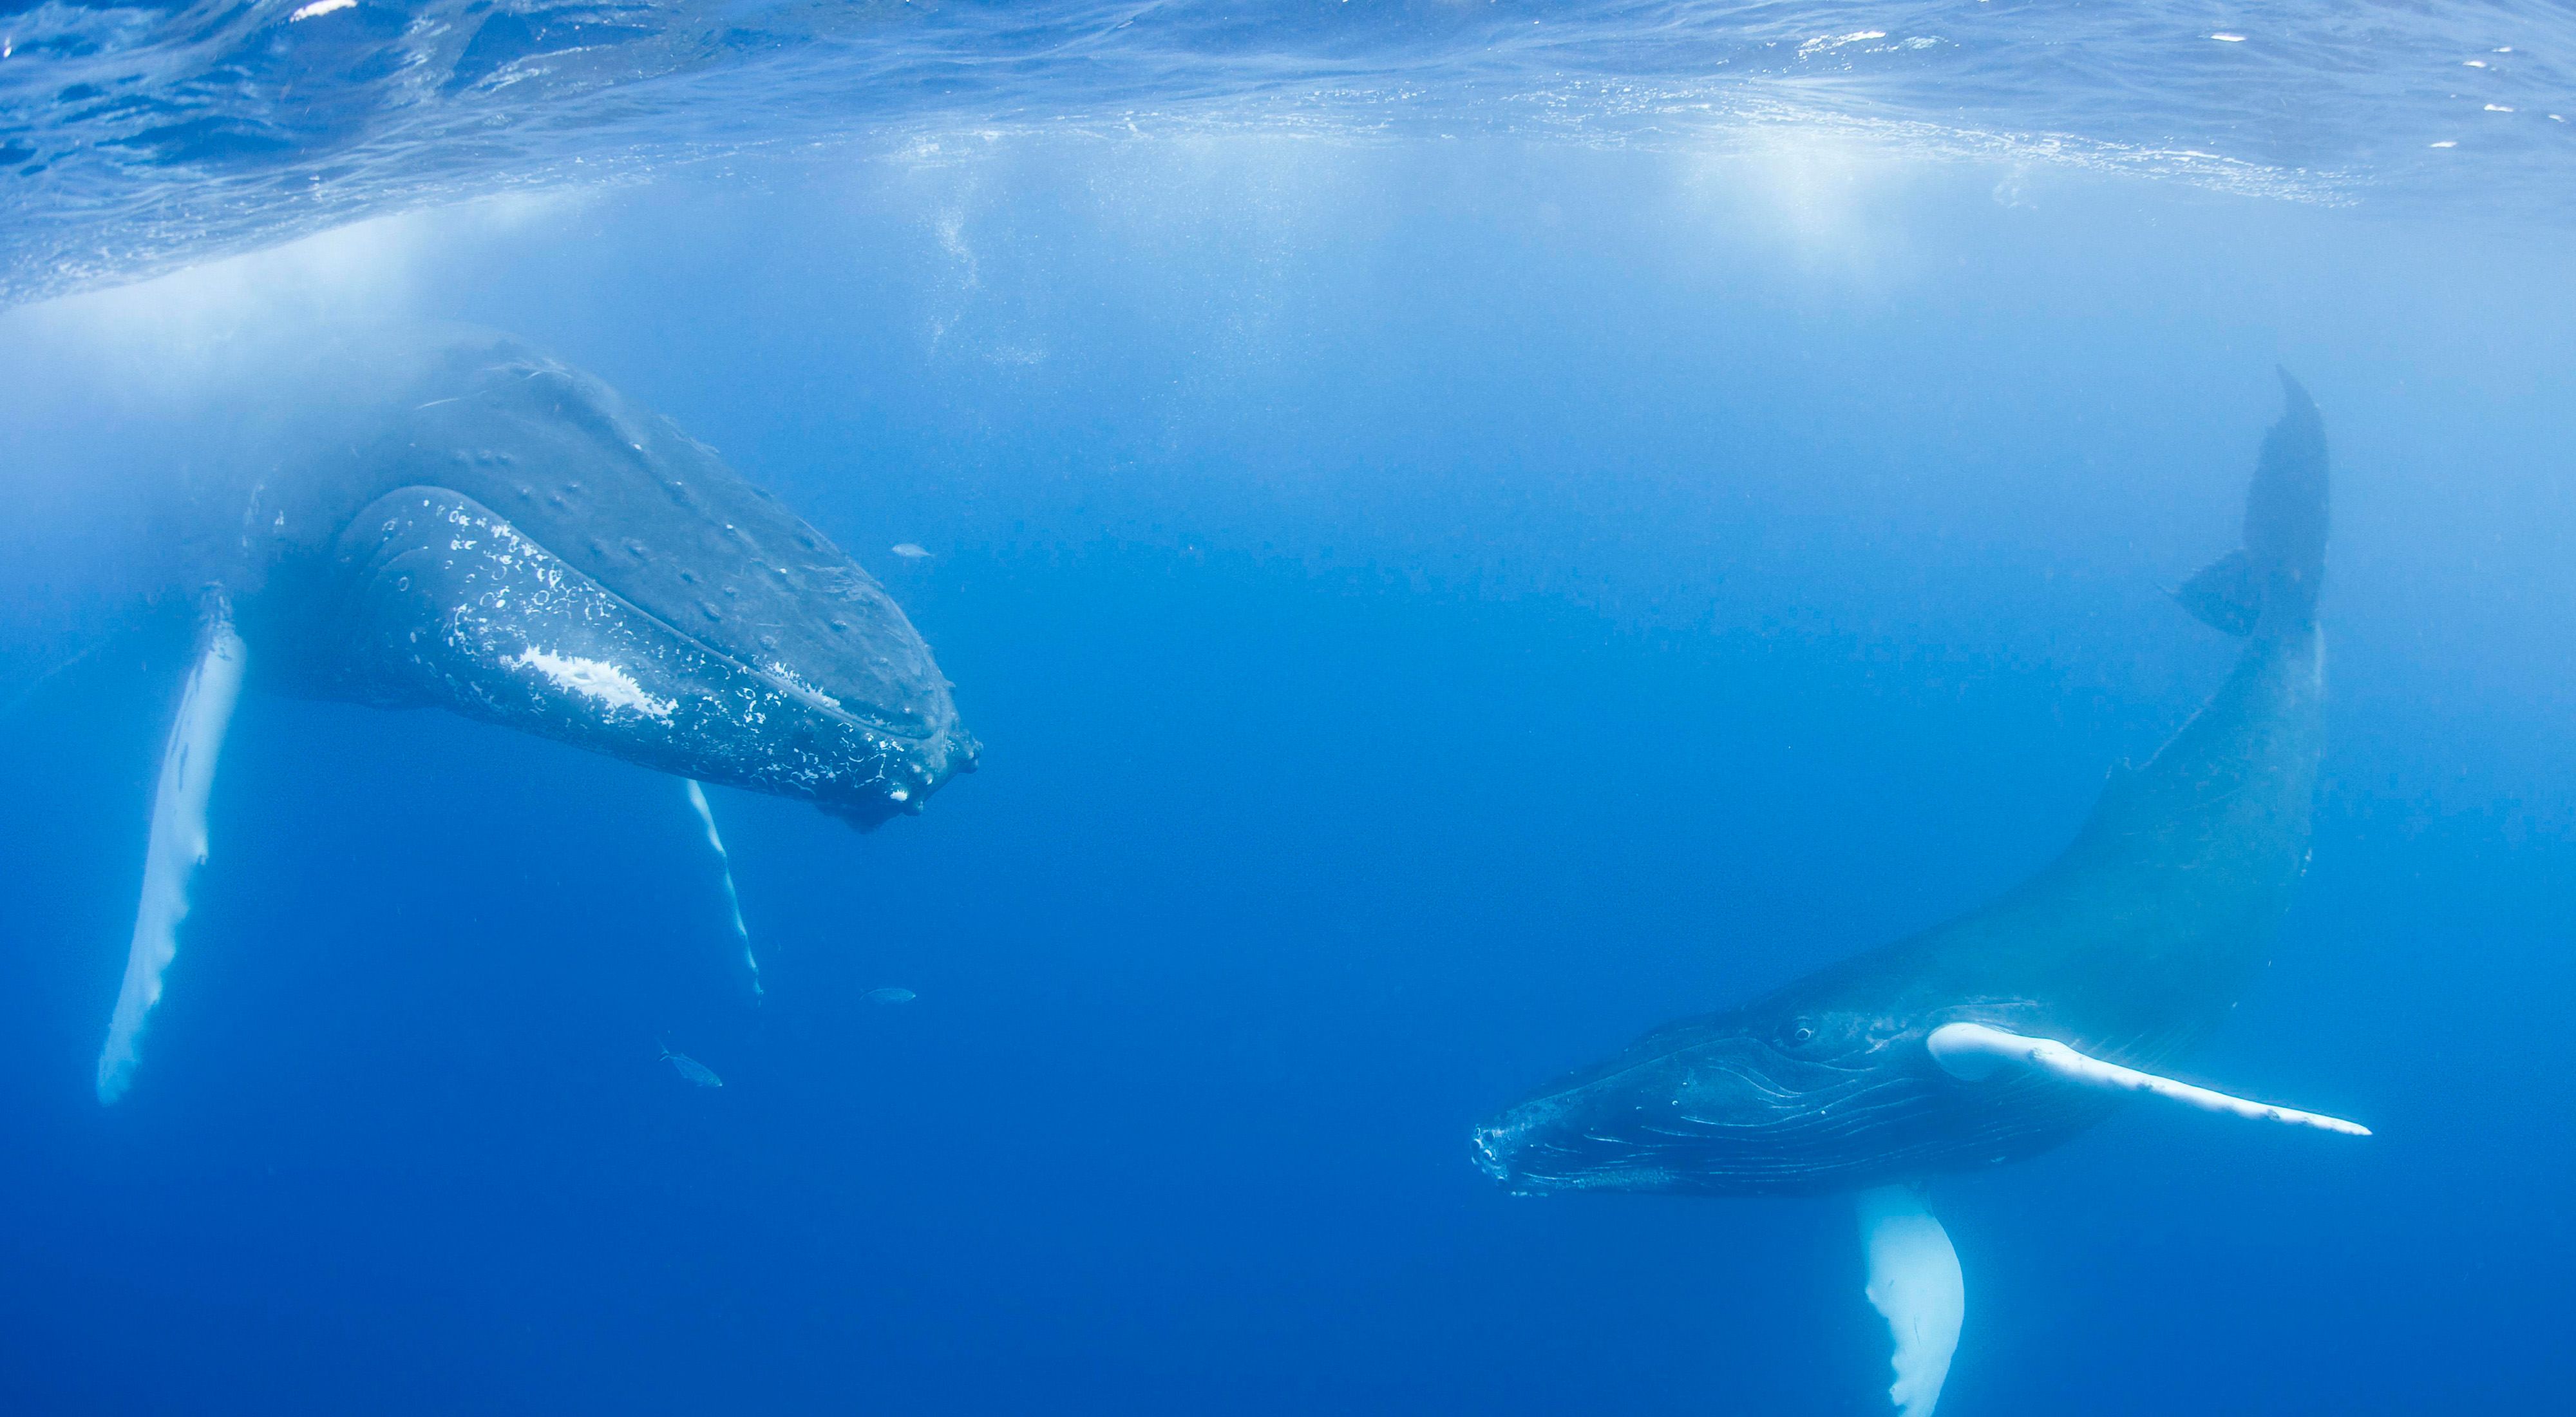 Two humpback whales, a cow and her smaller calf, float suspended in a deep blue ocean.